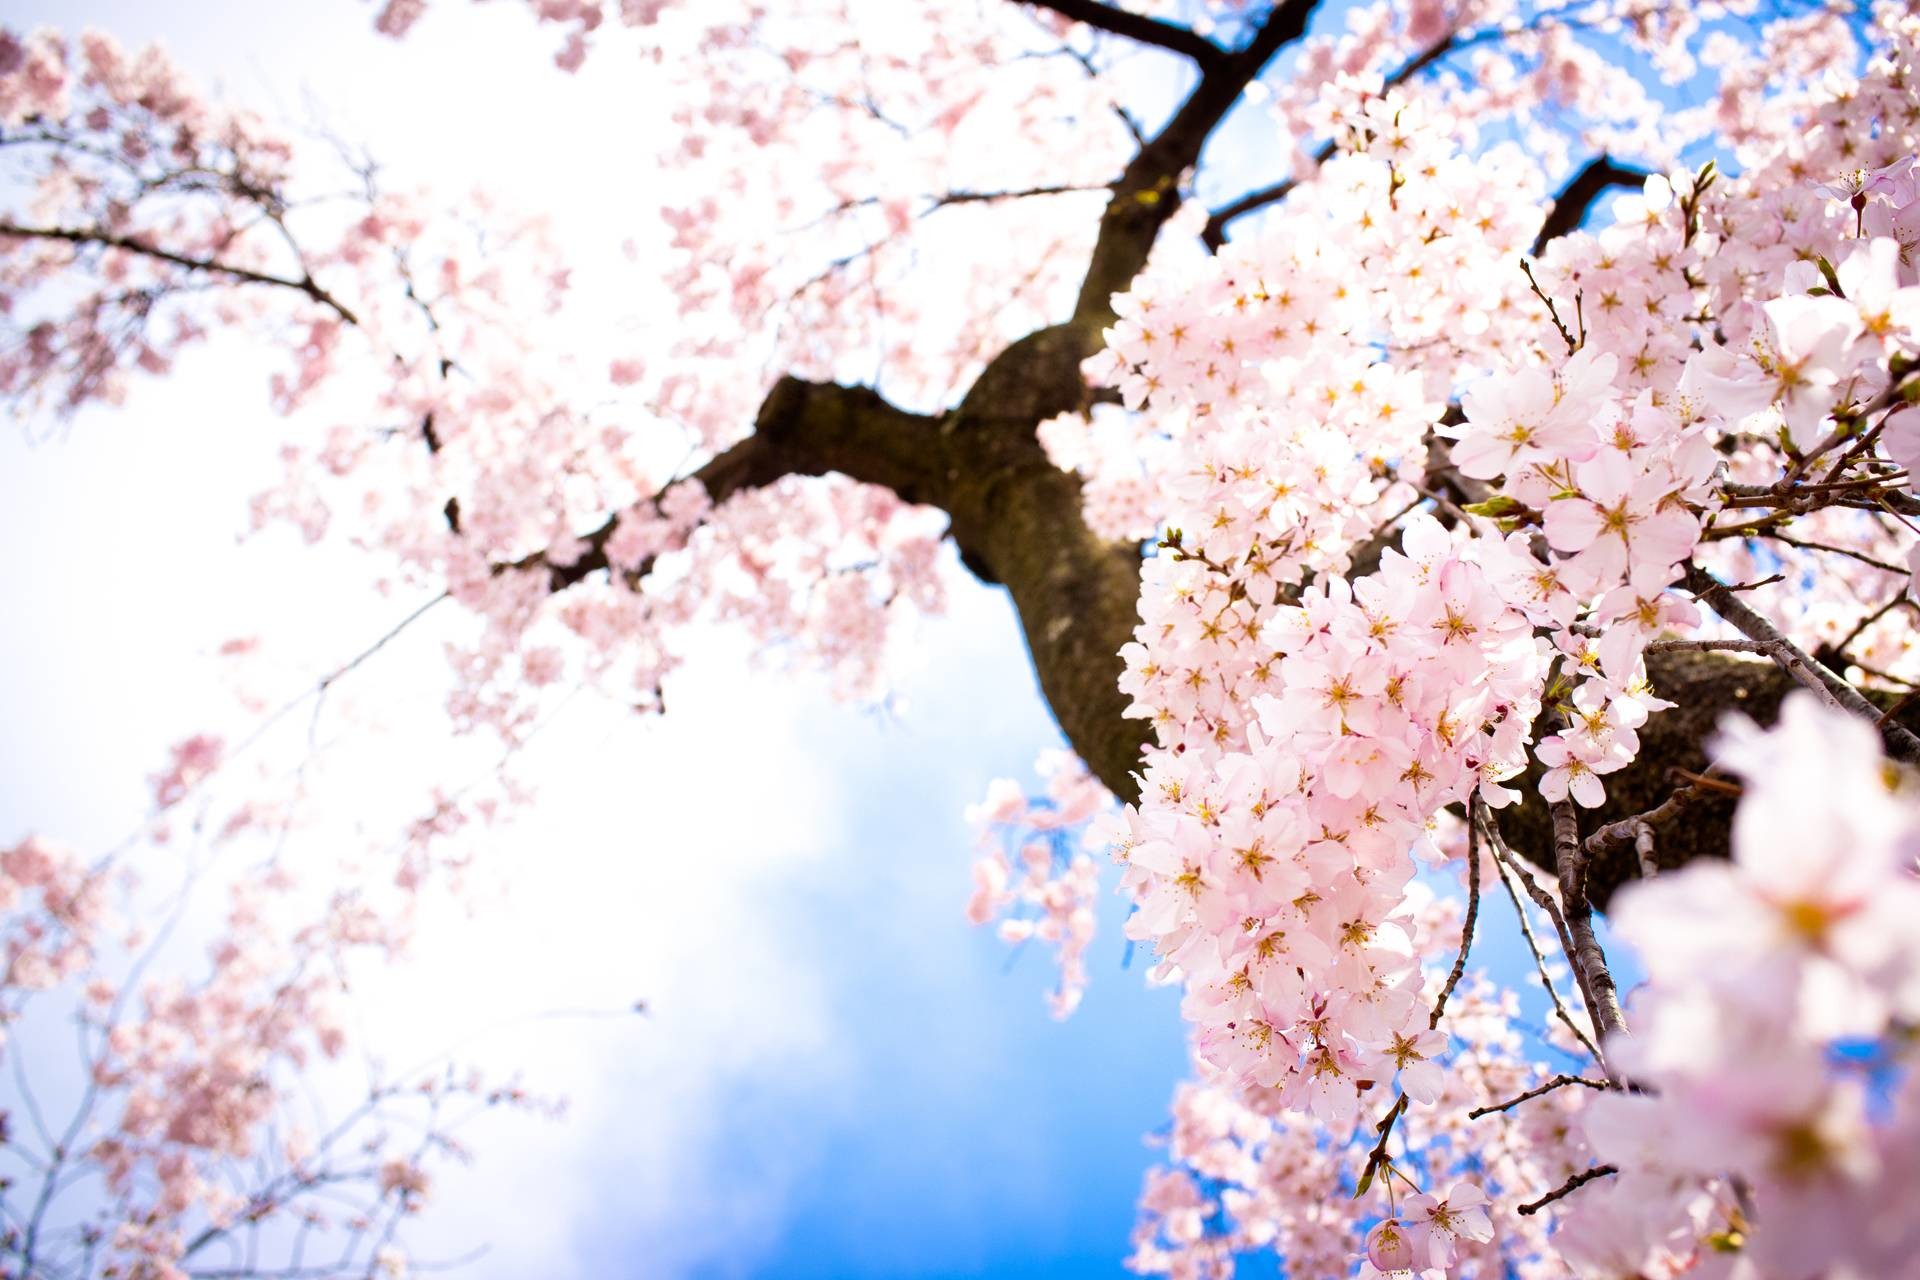 1920x1280 iphone 5 wallpaper cherry blossom - Favourite Pictures